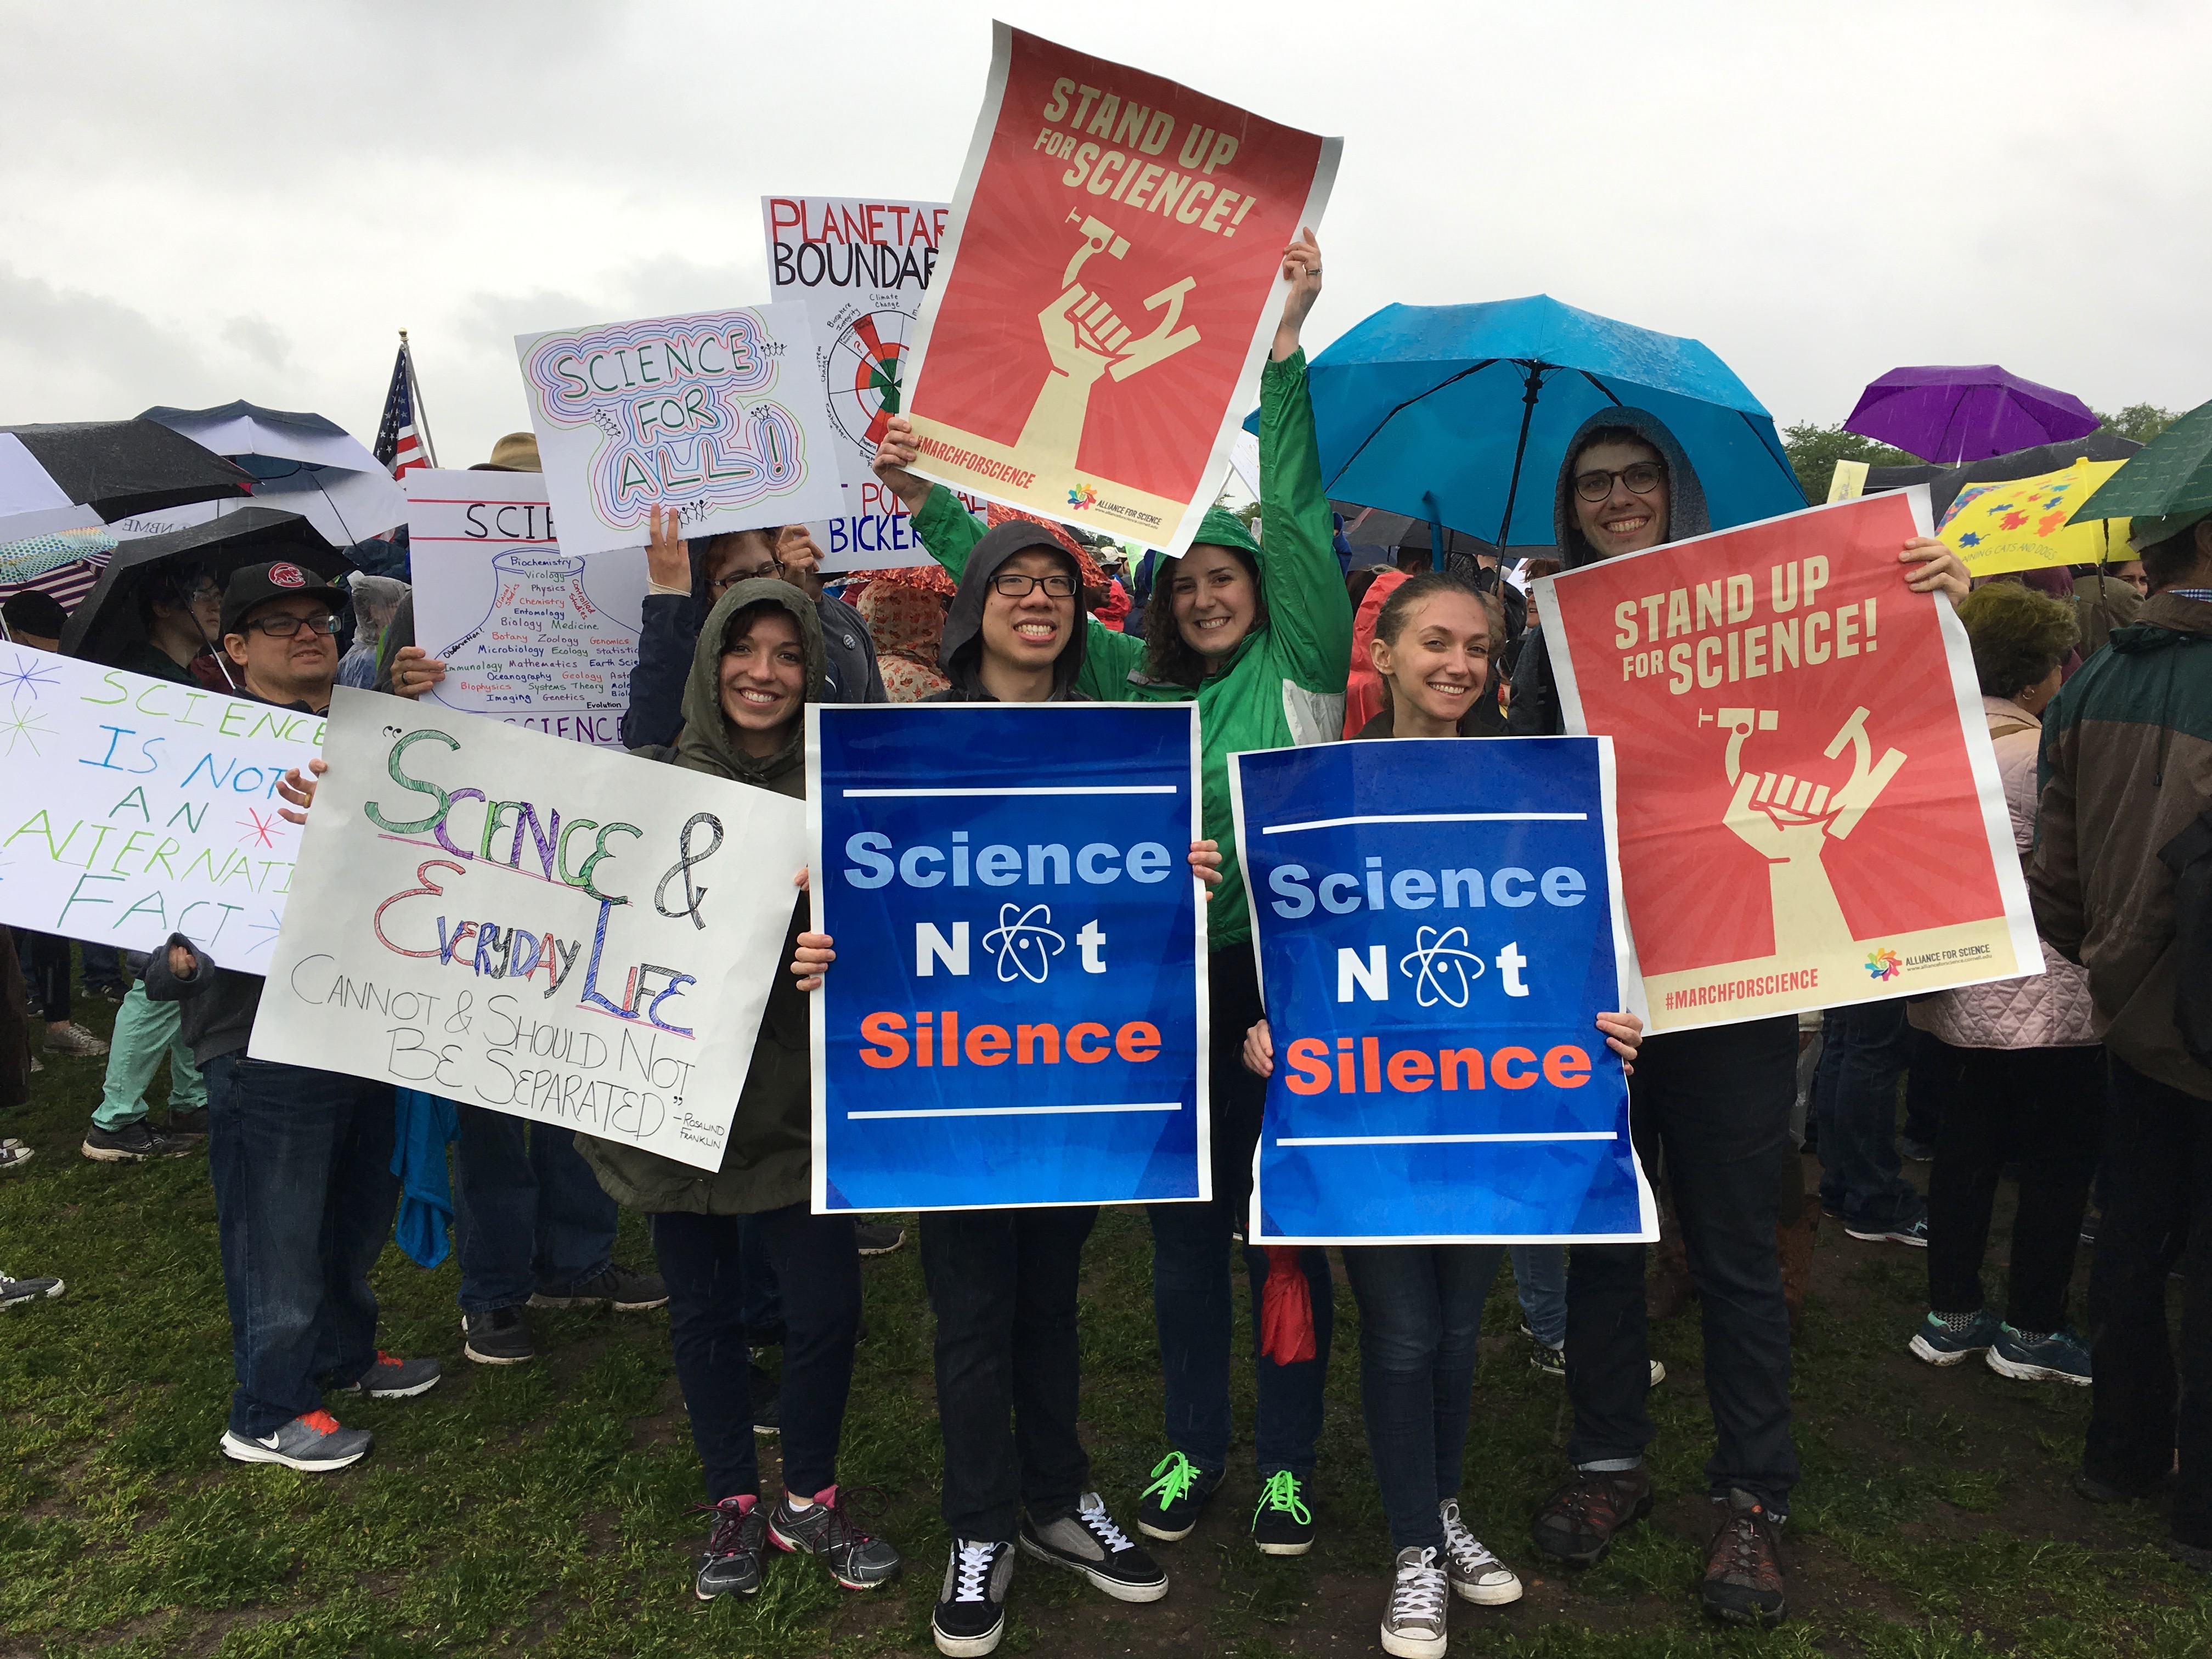 Why I Marched for Science